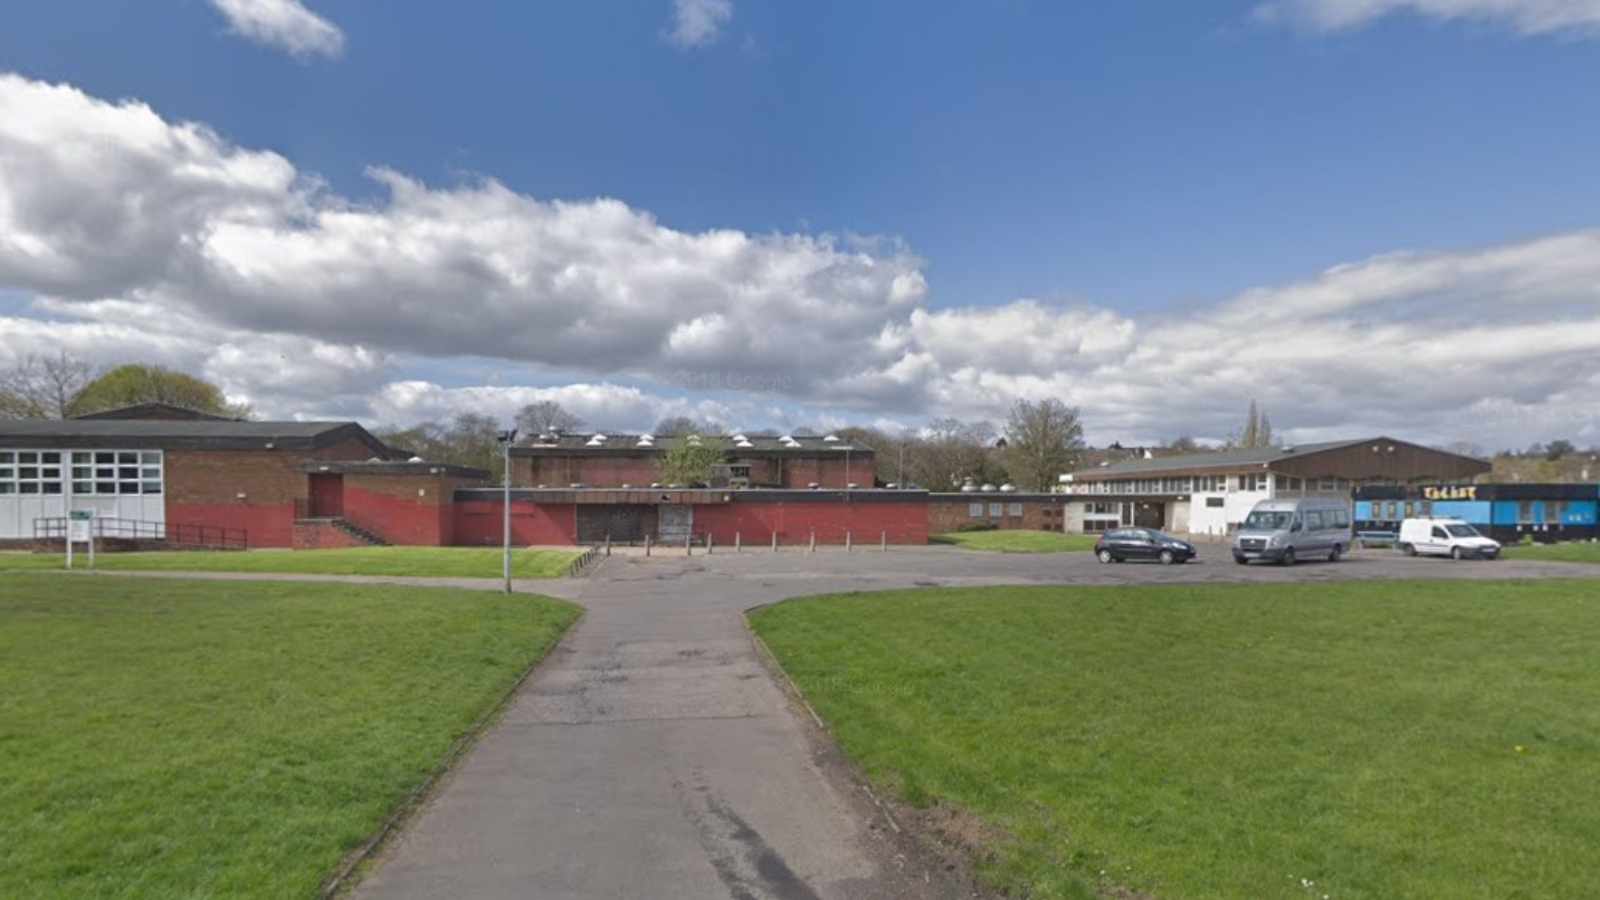 The incident occurred at Netherton Community Centre.